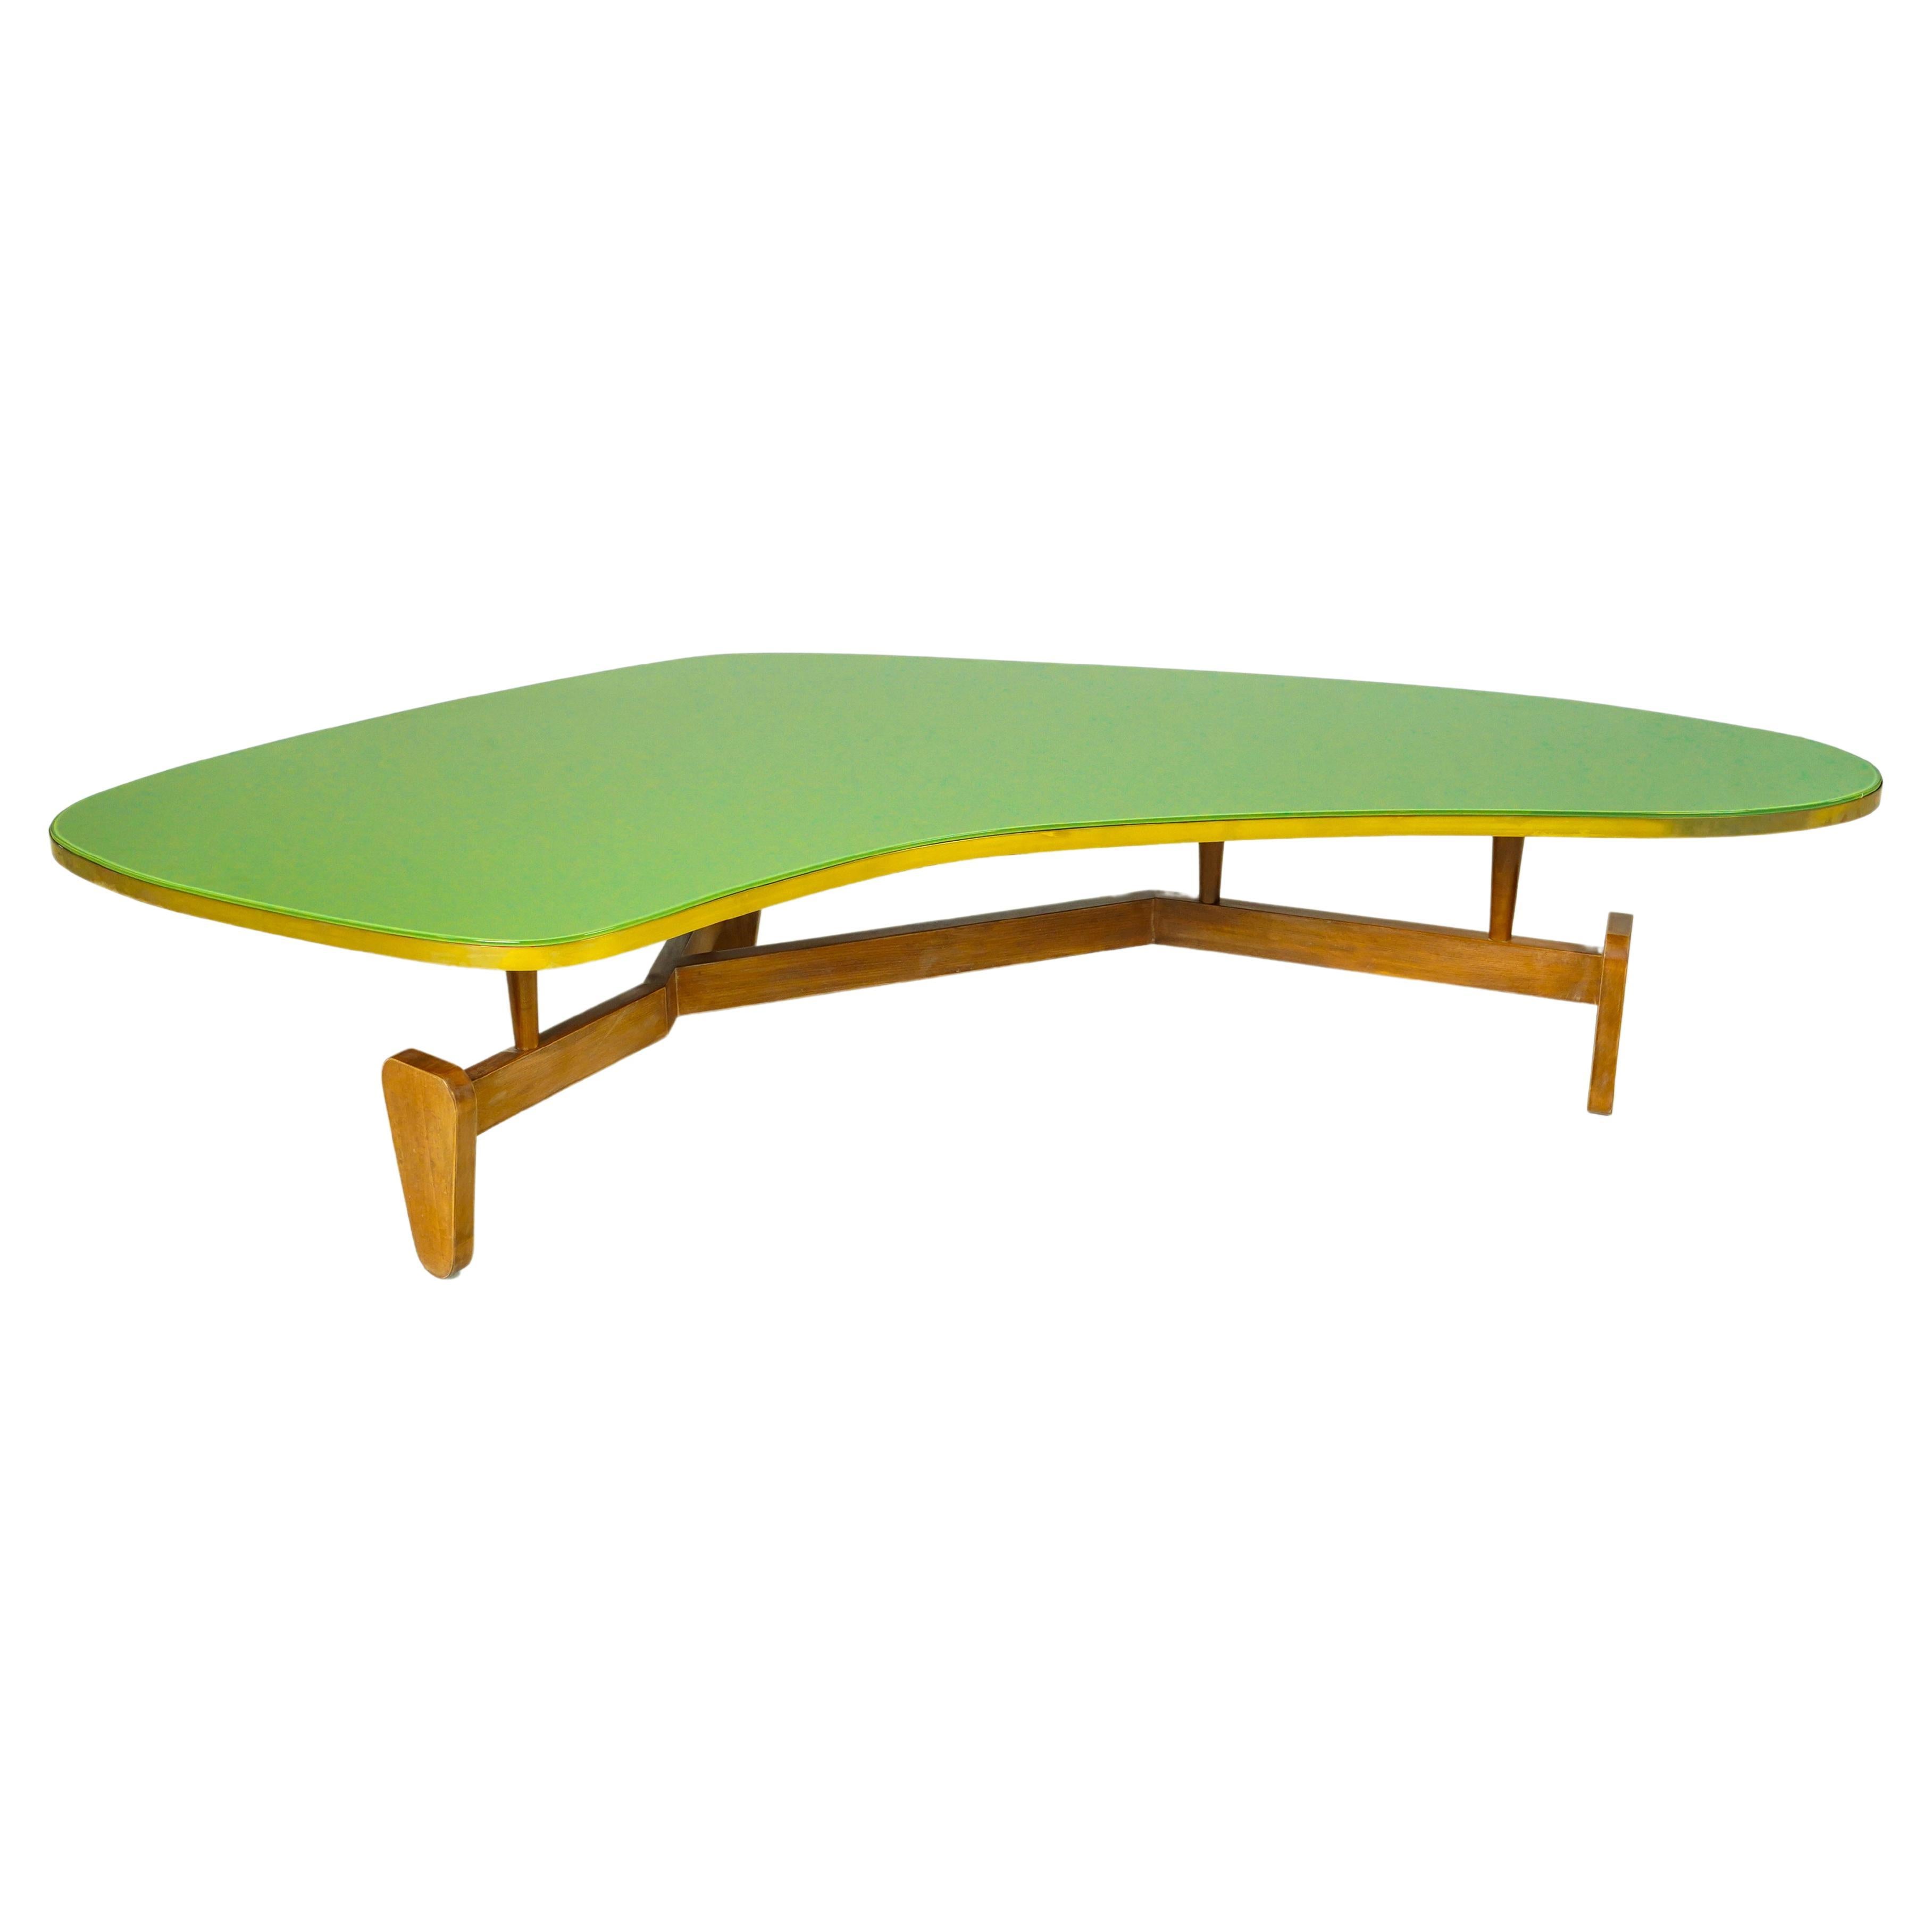 Boomerang Shape Coffee Table with Green Glass Top